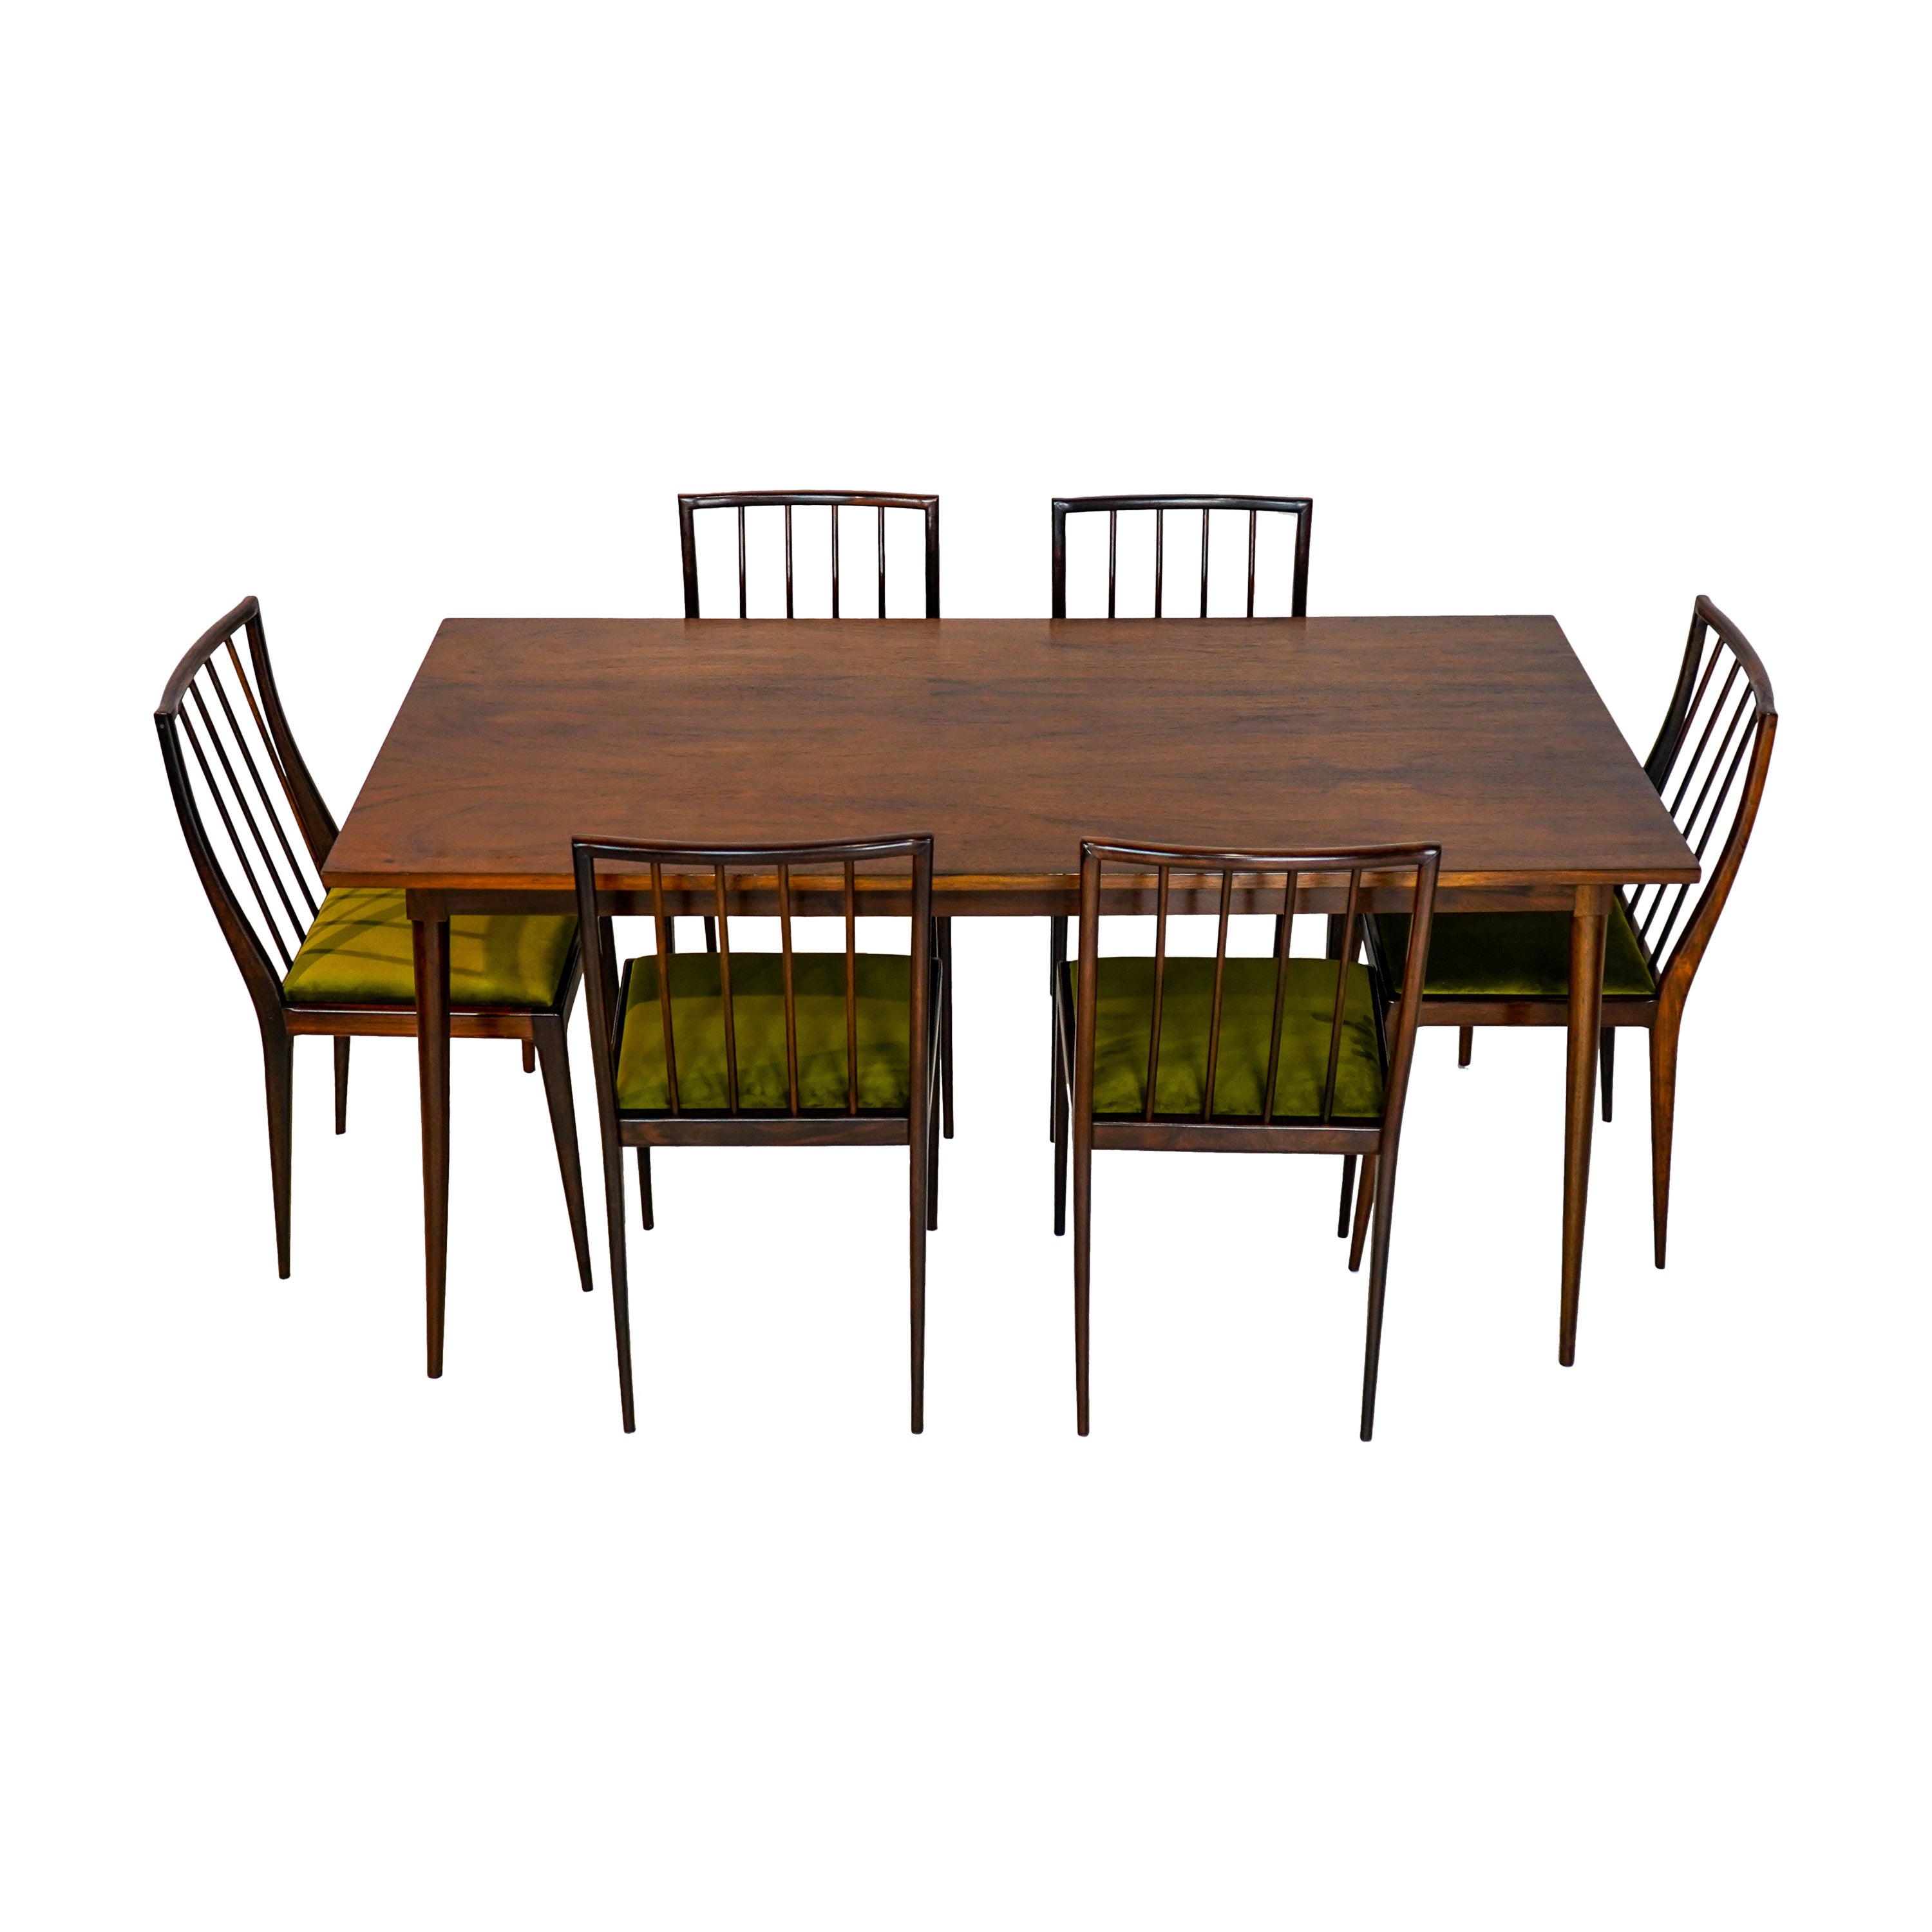 GB01 RIPAS - 6 chairs and sealed table in Rosewood, Geraldo de Barro Unilabor For Sale